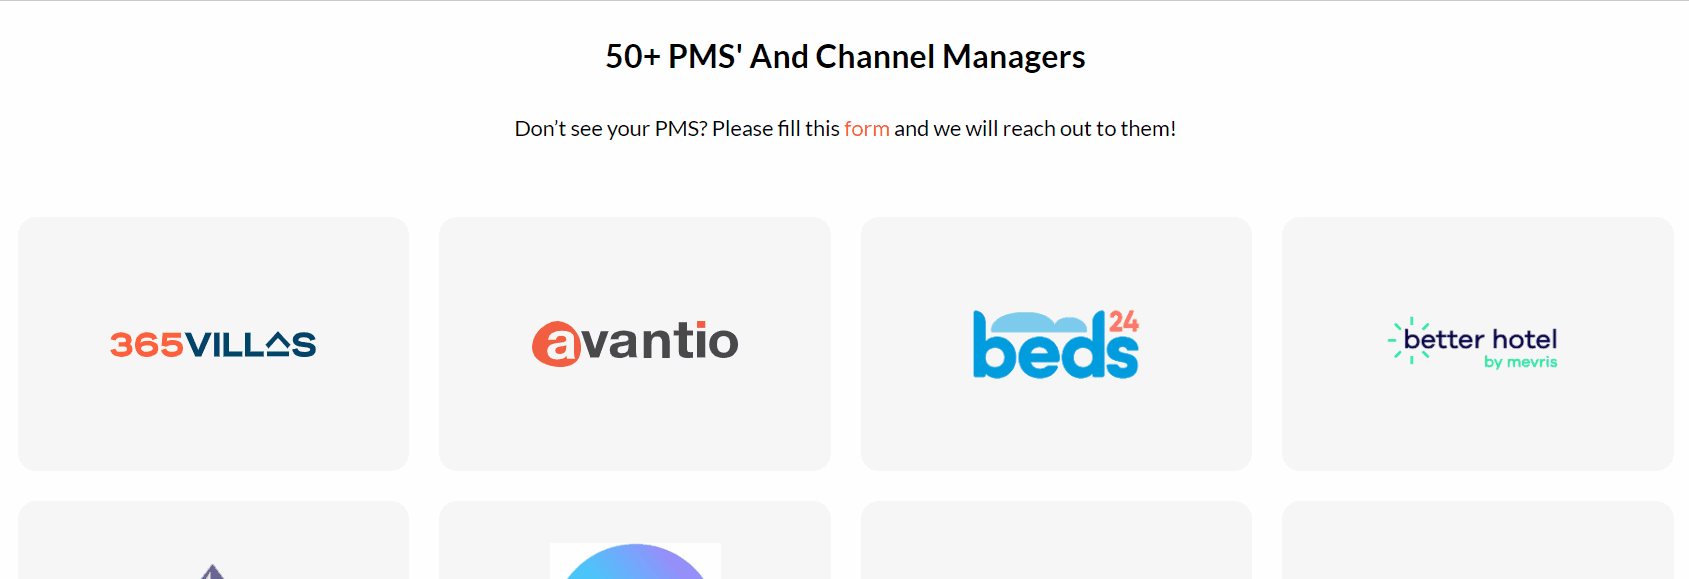 PriceLabs added a lot of new PMS and channel integrations in 2021